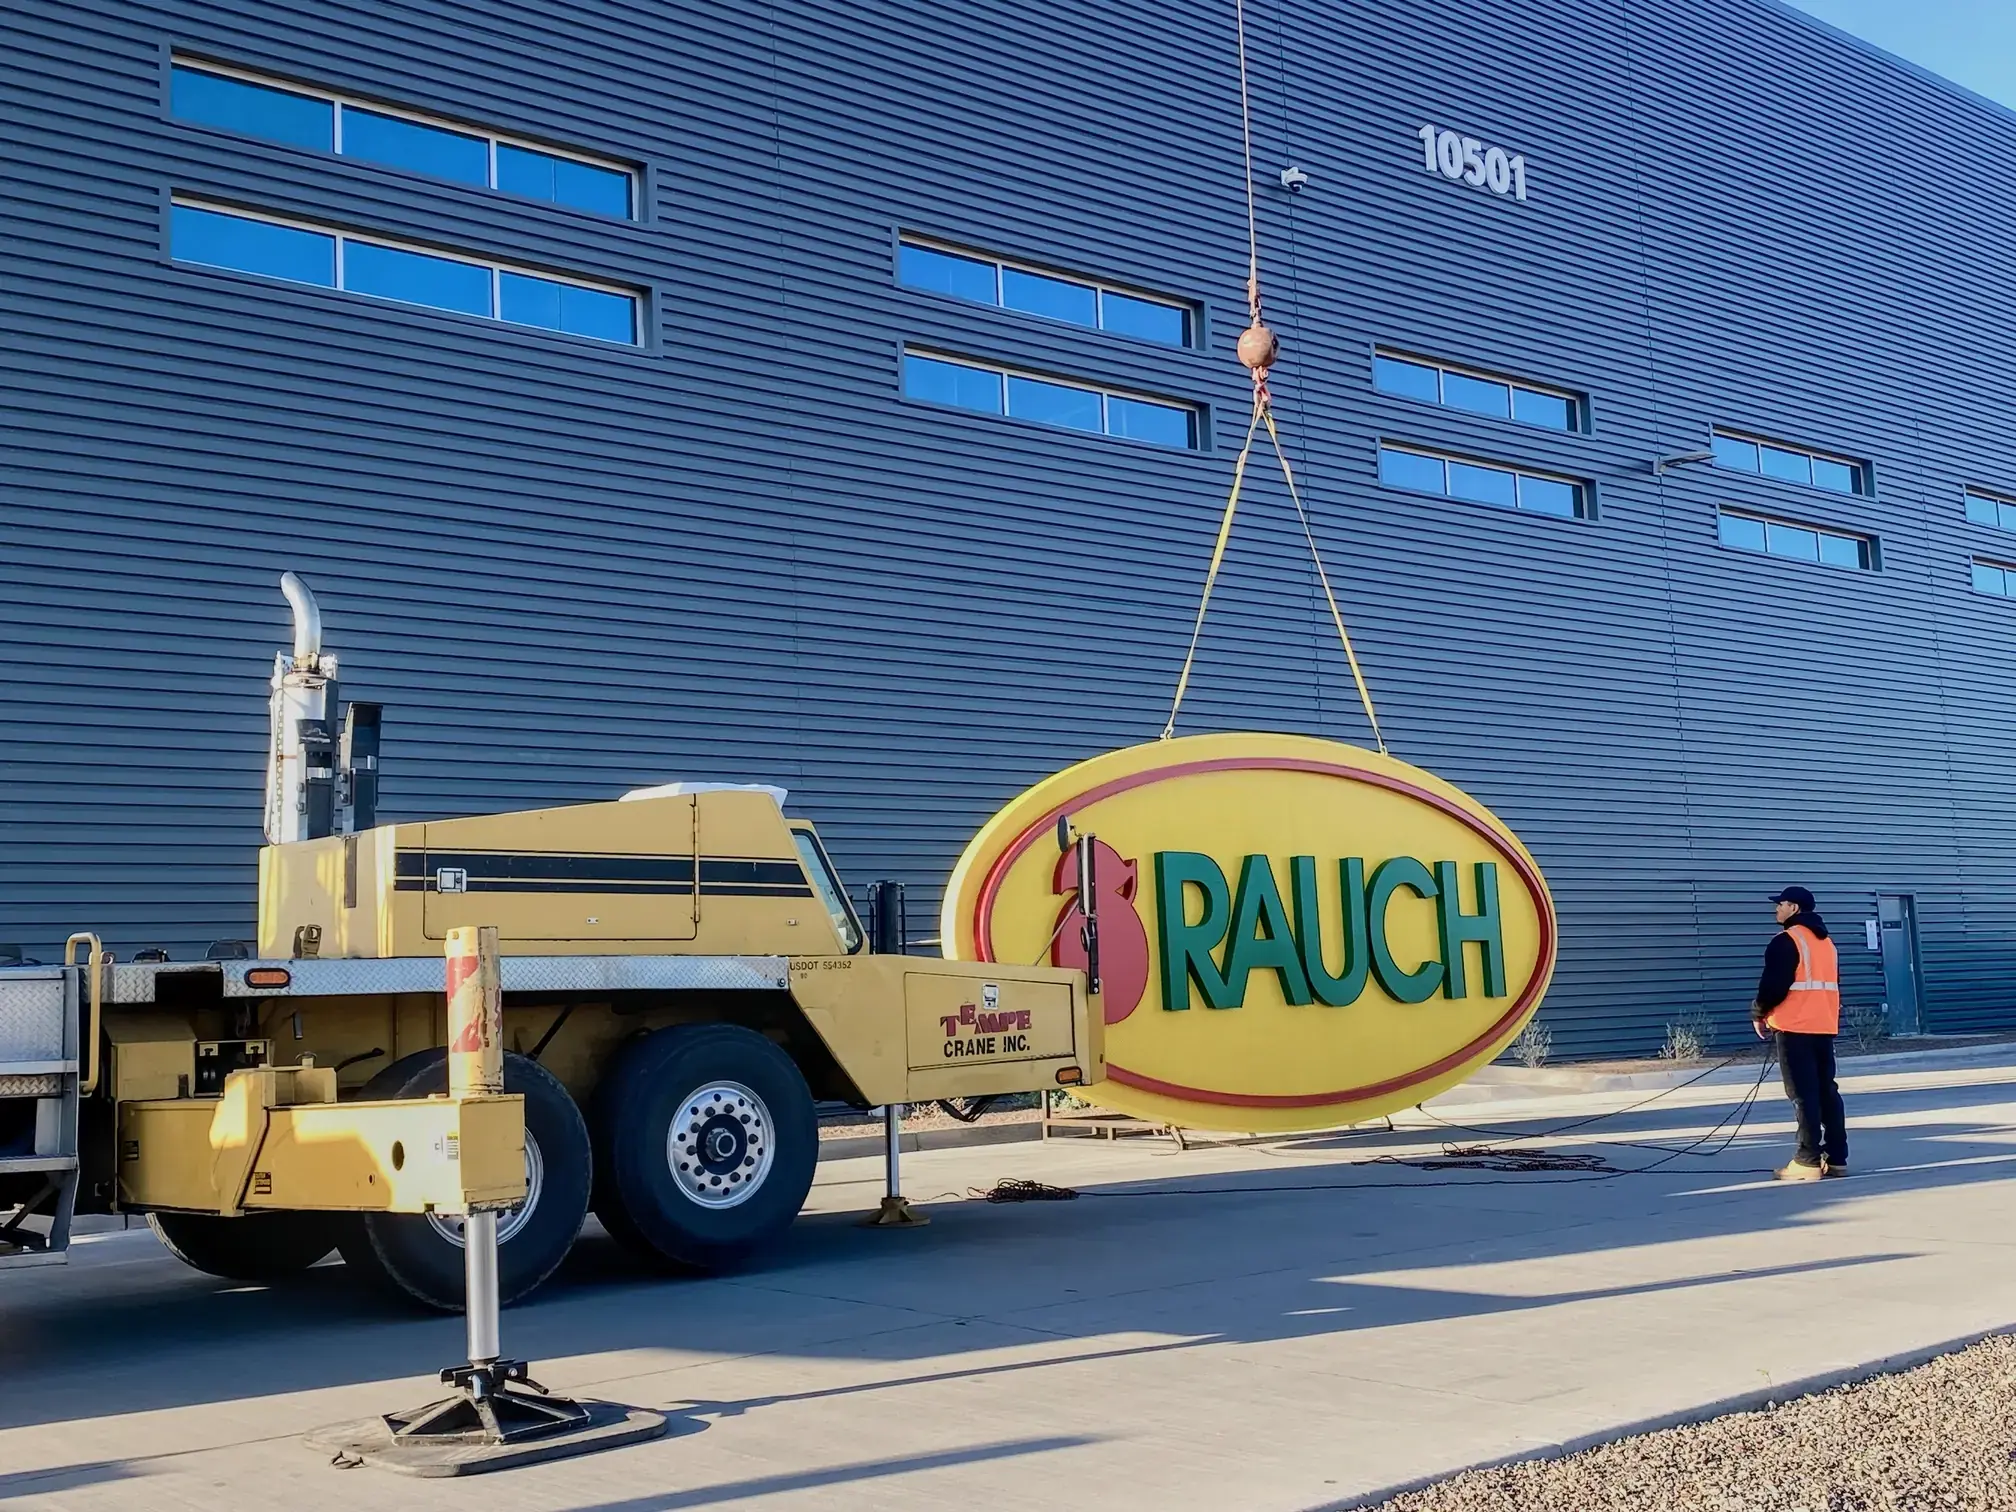 A crane preparing to lift large commercial signage into place, symbolizing the impact of our services on commercial visibility.